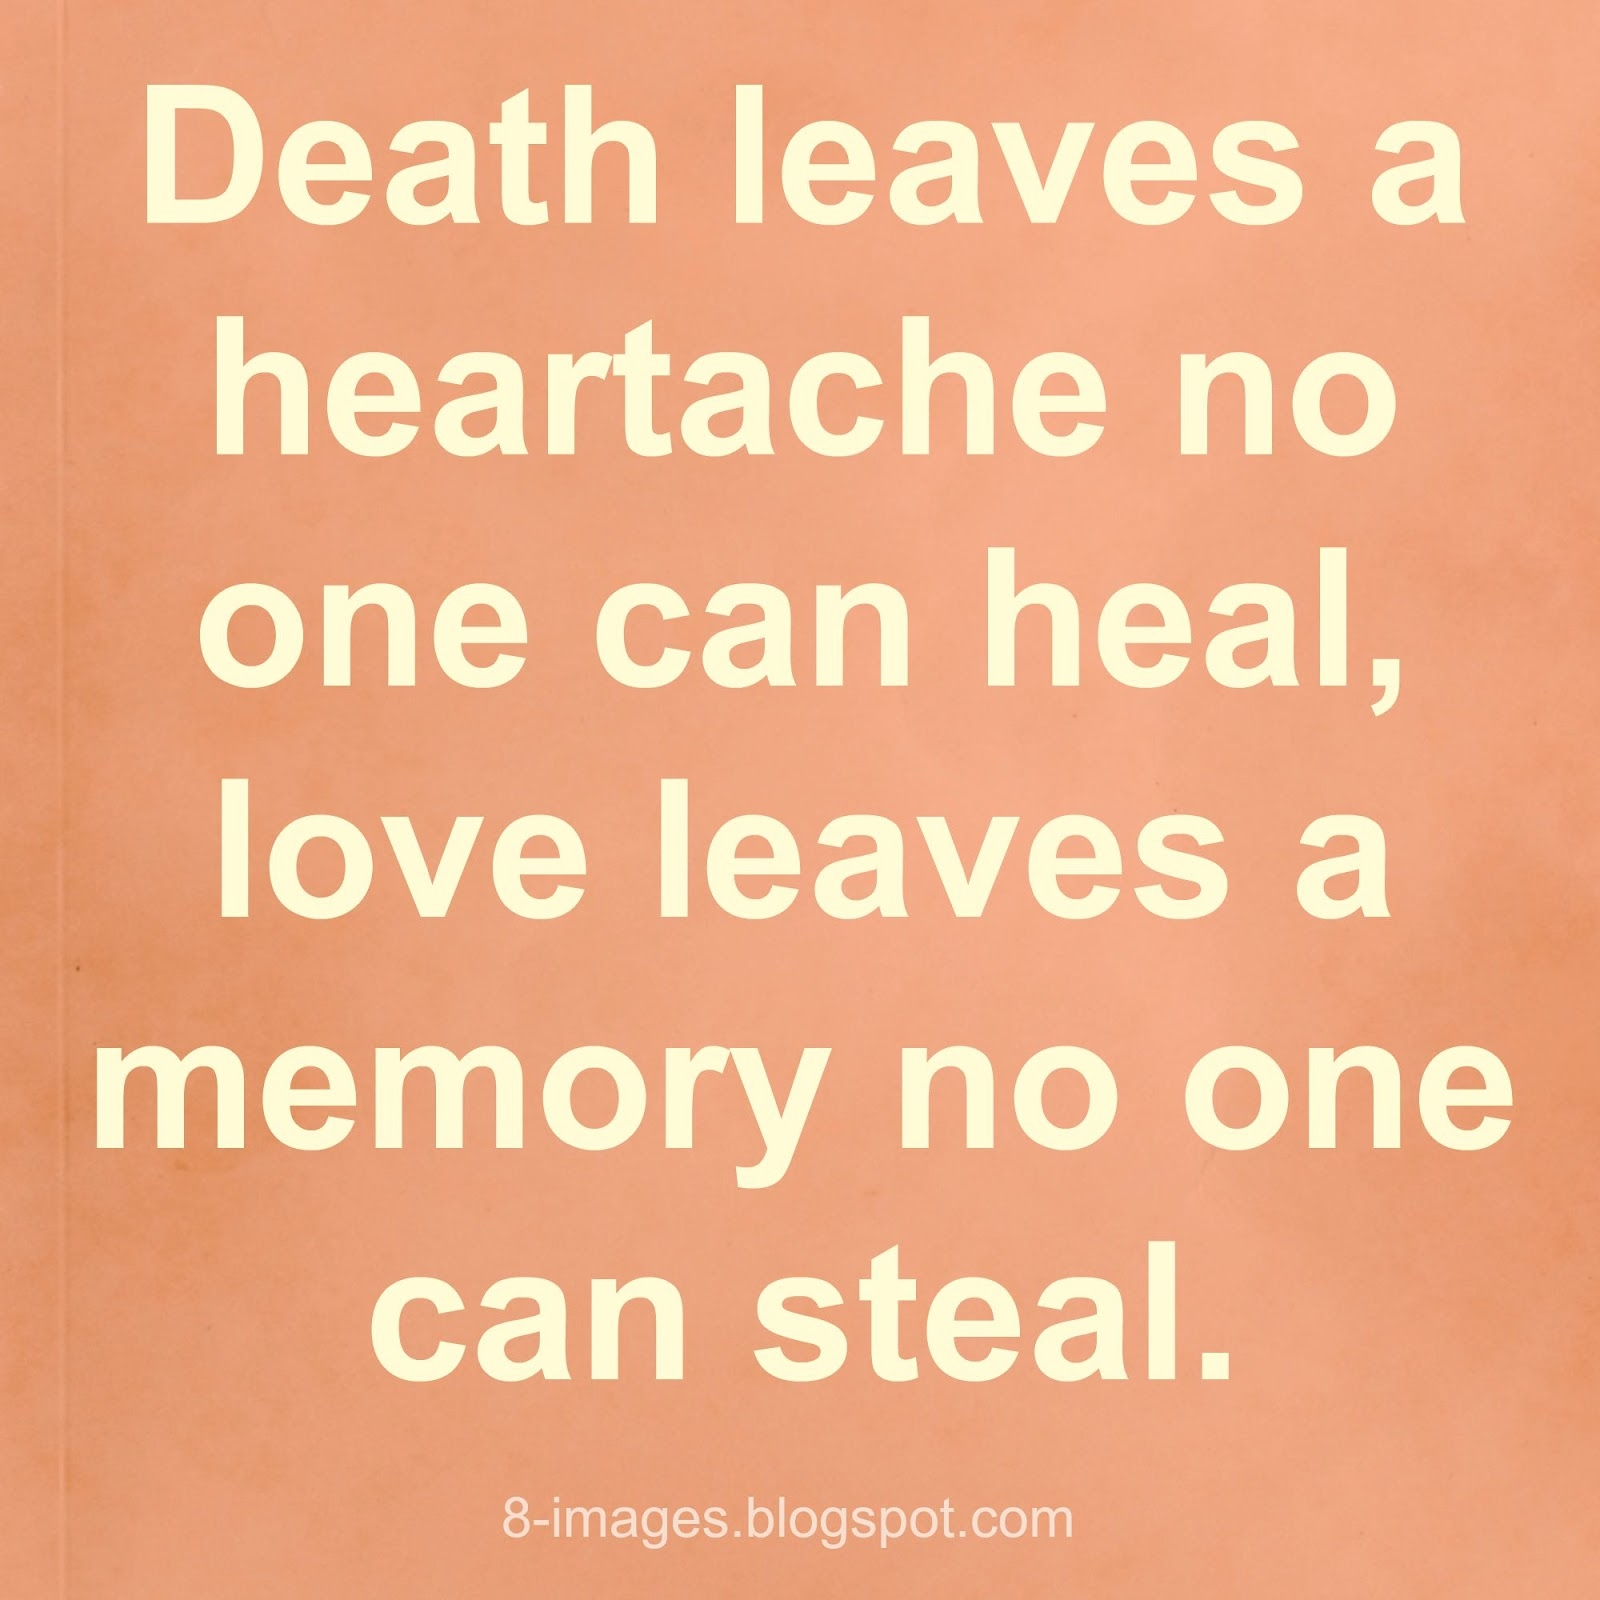 Quotes For Losing A Loved One To Cancer Image 06